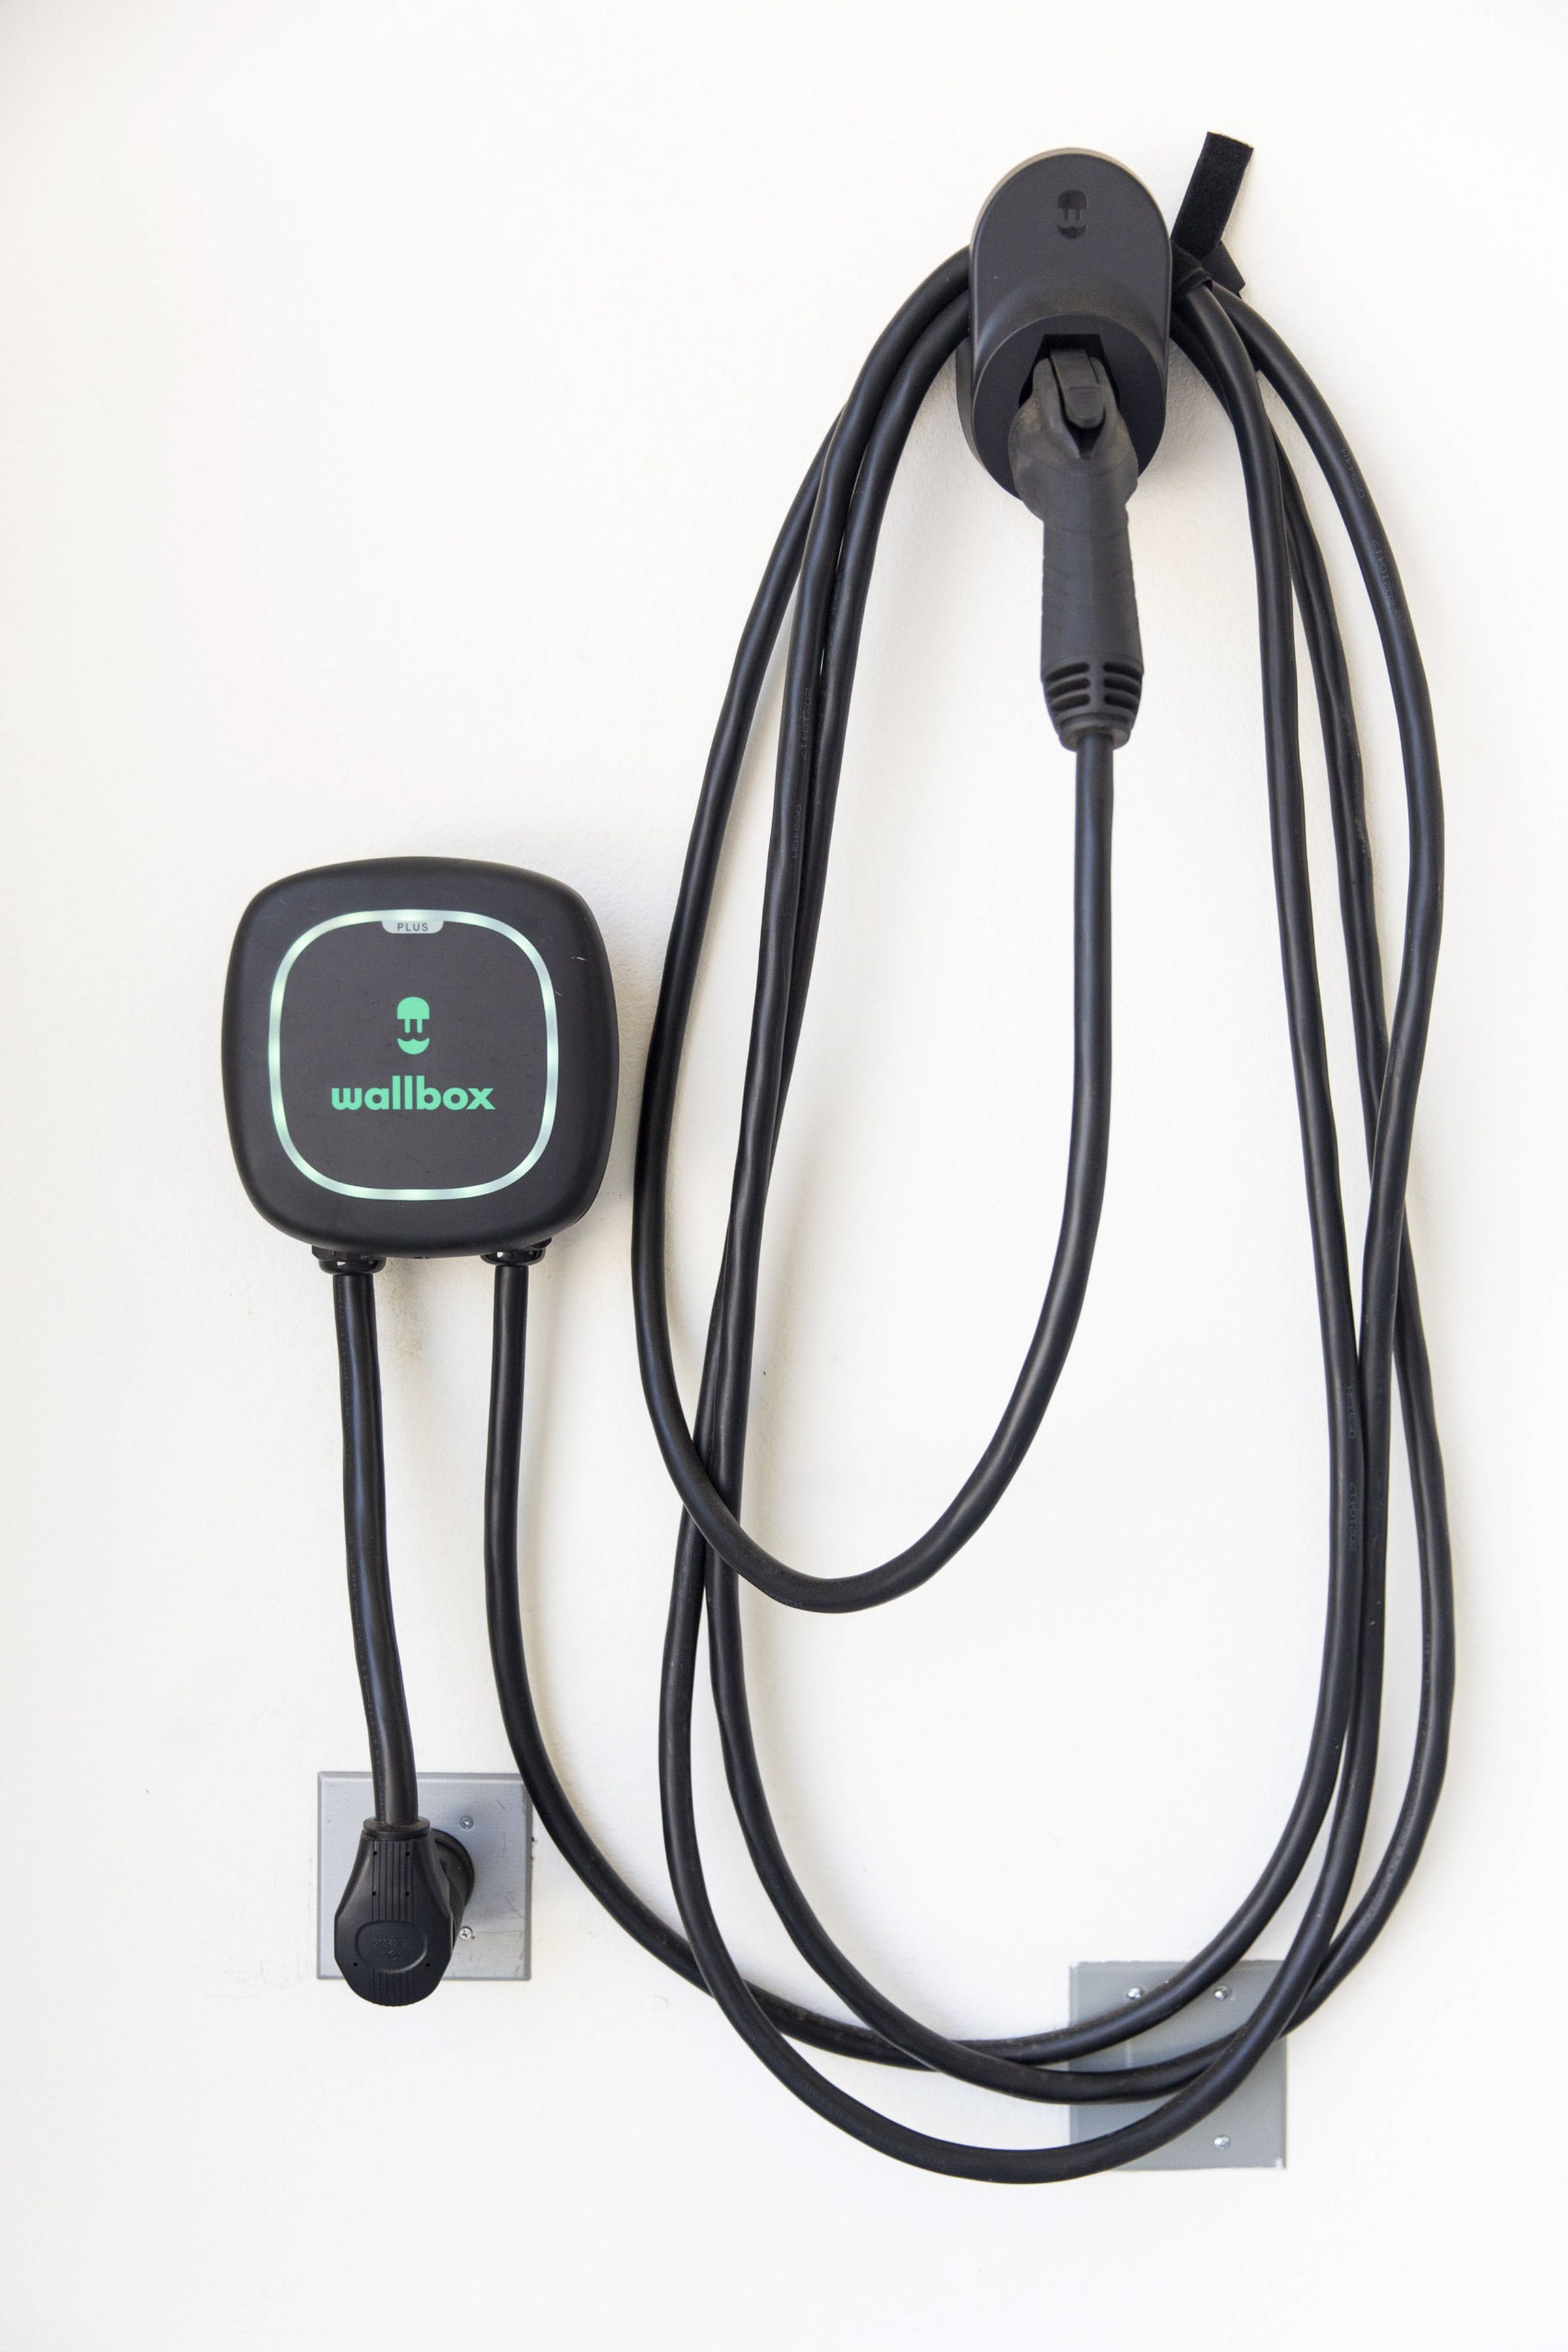 <em>Every home is prewired for an EV charger, and 10 come equipped with a </em><a href="https://us.sunpower.com/products/wallbox-ev-charger"><em>Wallbox Quasar 2</em></a><em> as part of a high-output vehicle-to-home and vehicle-to-grid trial. The Quasar 2 is a bidirectional charger that can use the energy stored in the car’s battery to power the home or the grid. </em>